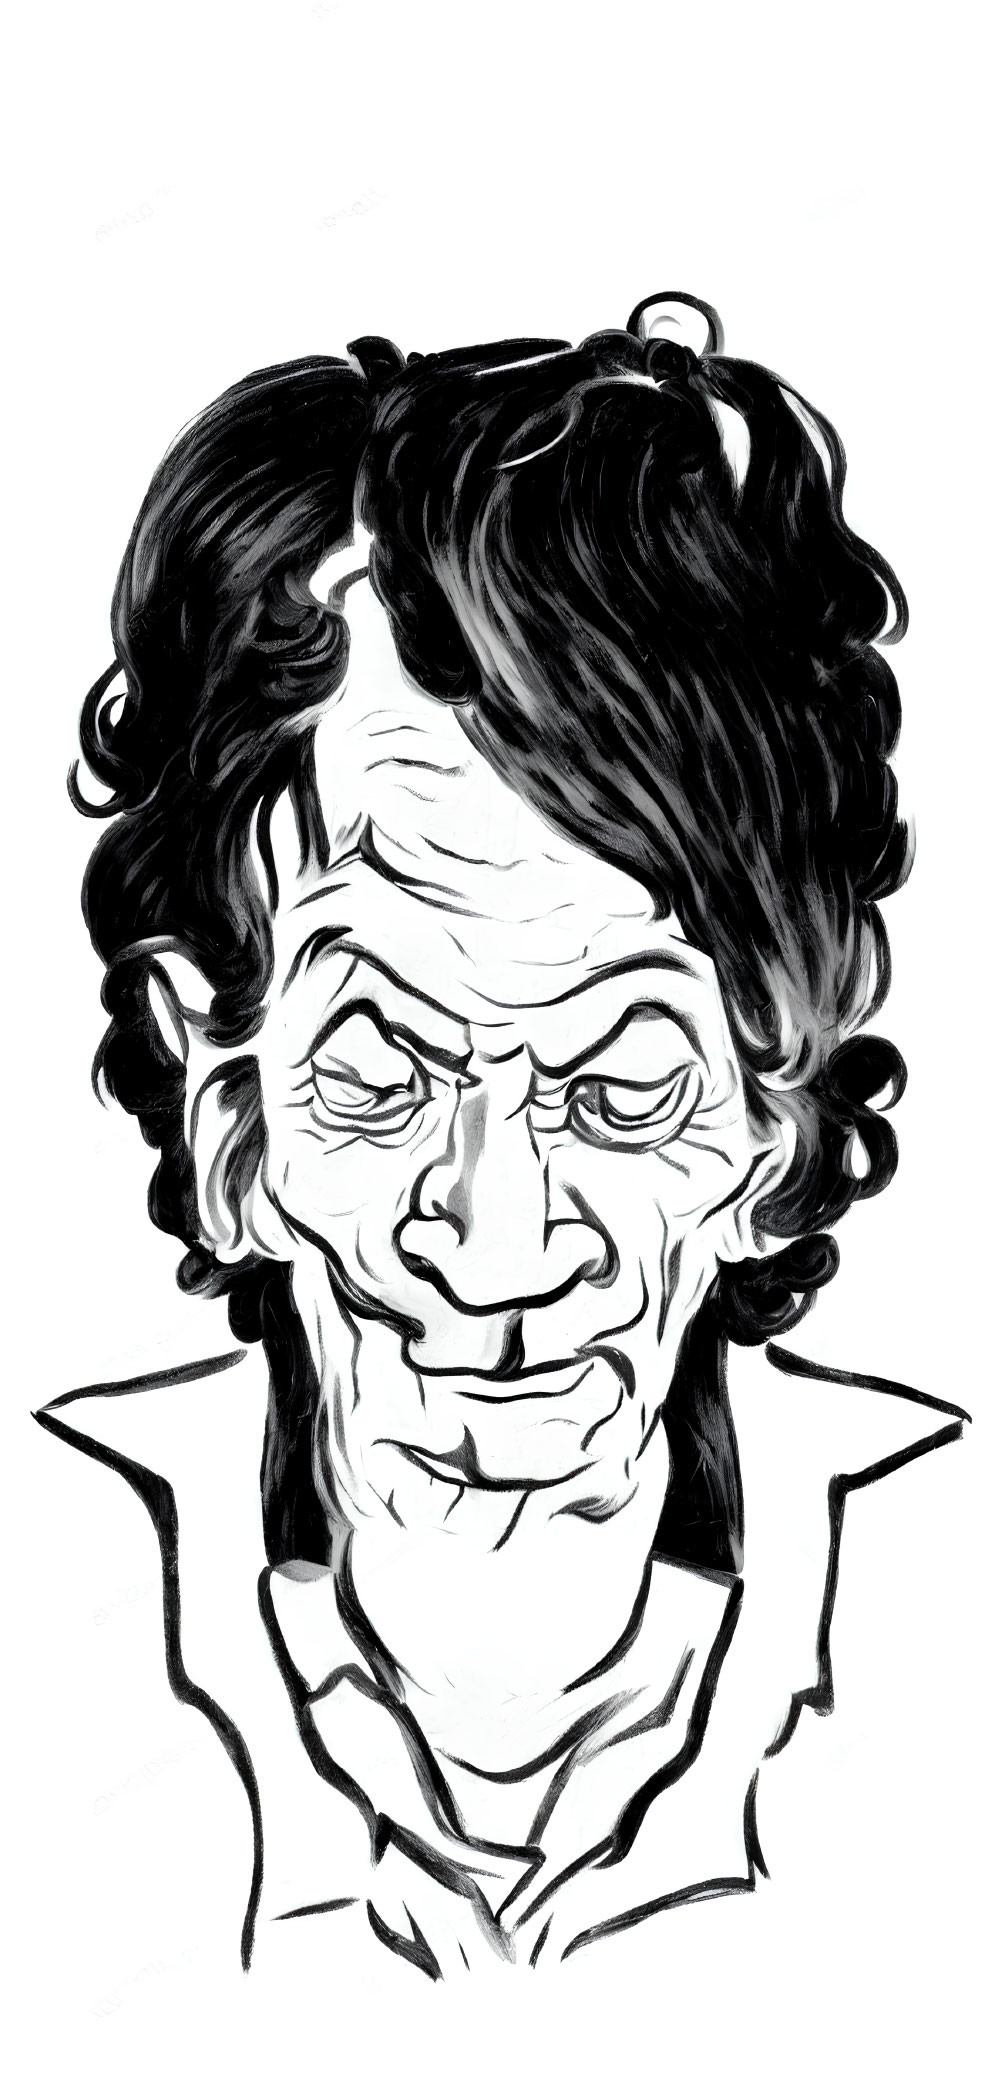 Monochrome caricature of a man with exaggerated features